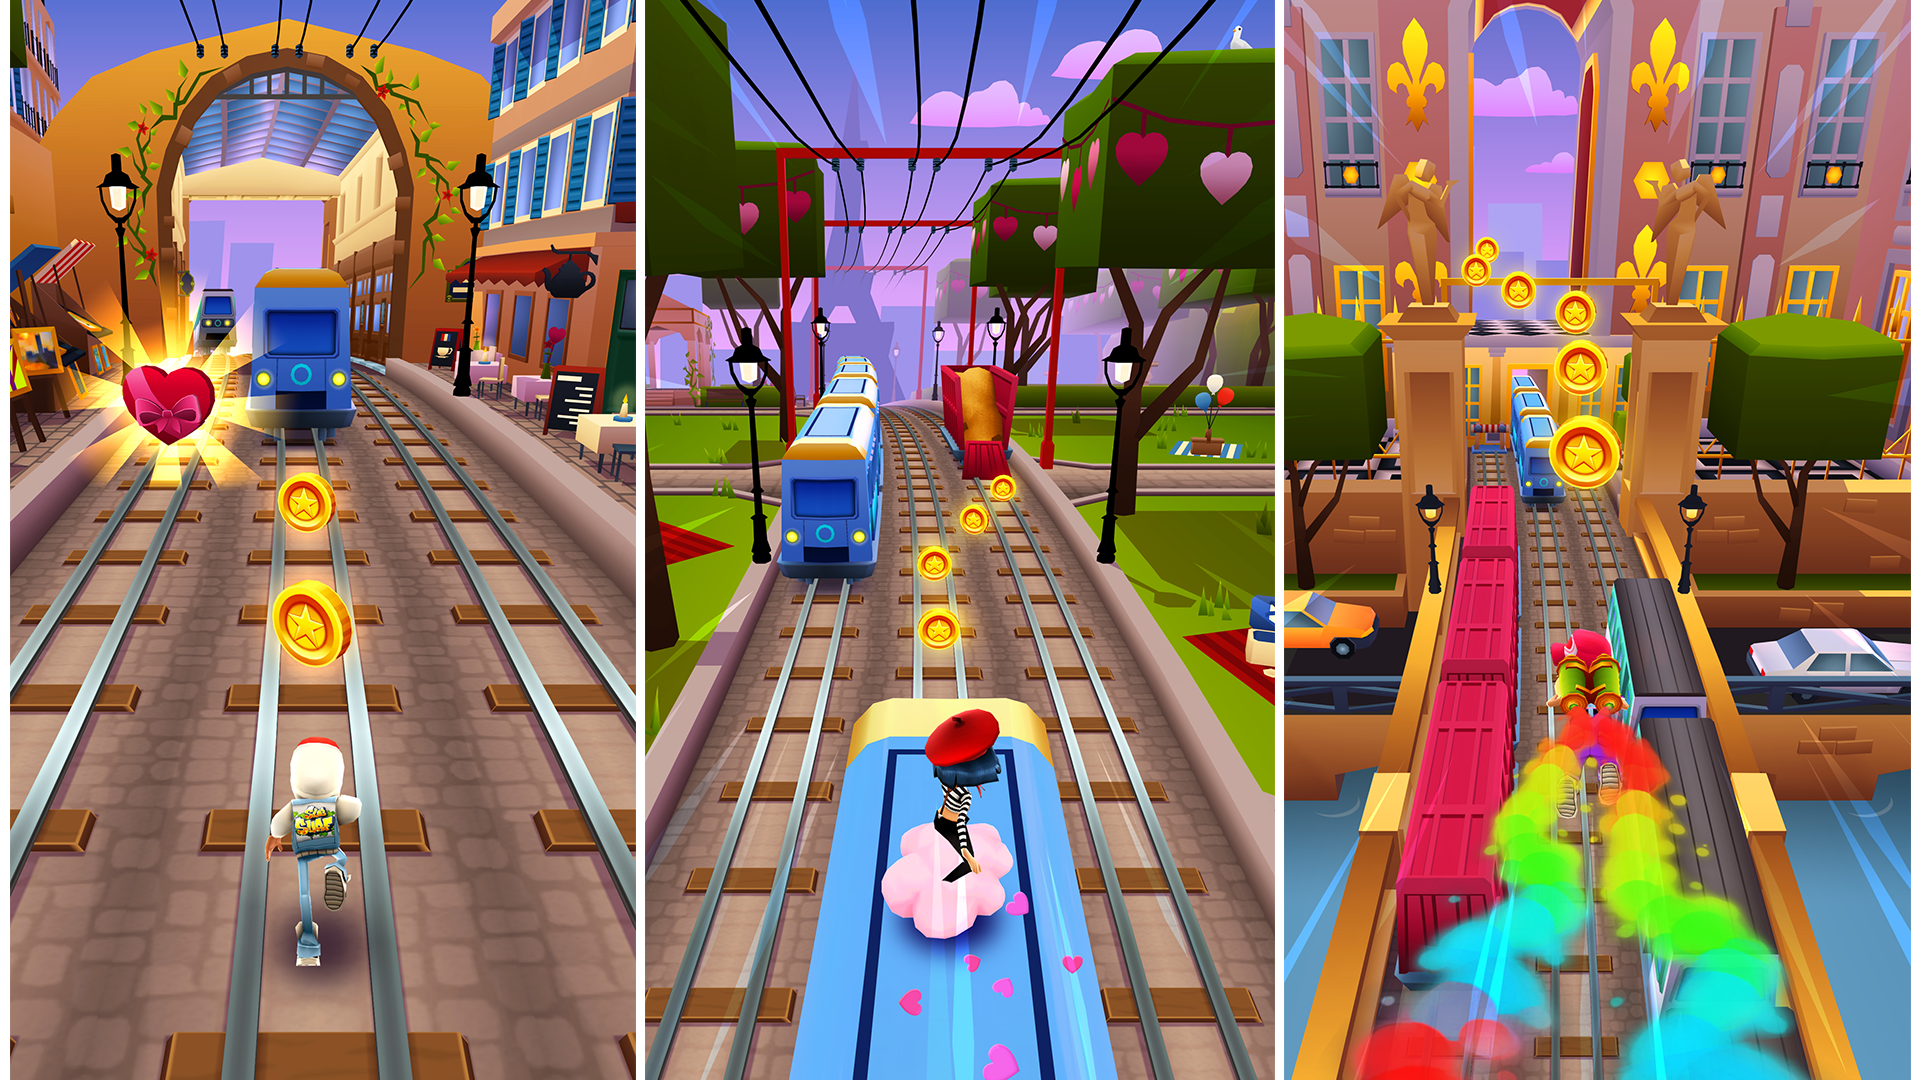 I End The Subway Surfers Game